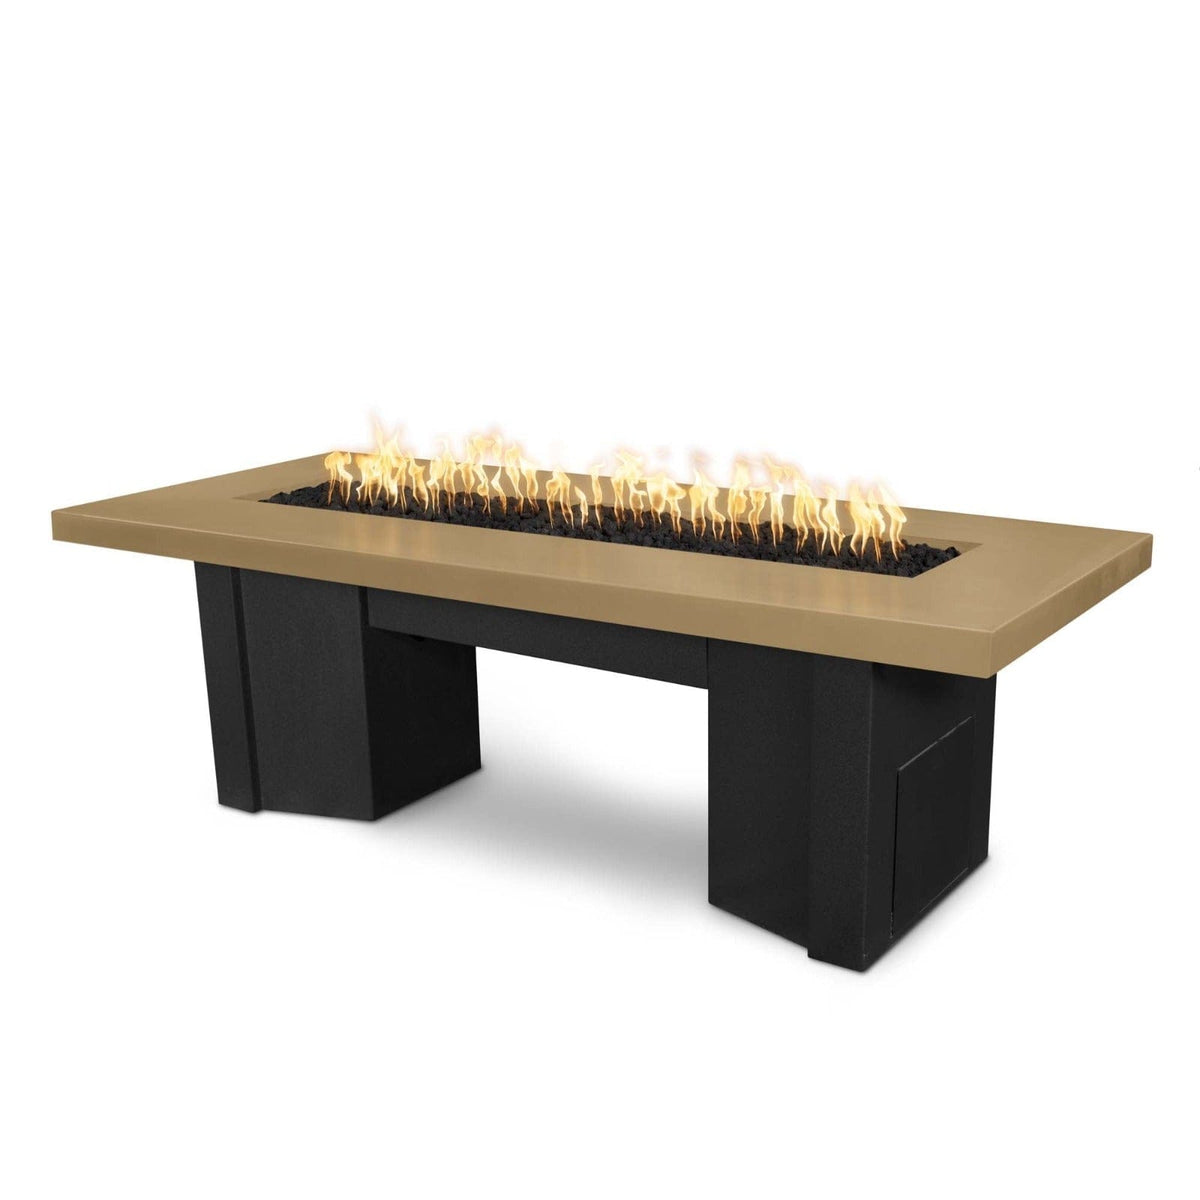 The Outdoor Plus Fire Features Brown (-BRN) / Black Powder Coated Steel (-BLK) The Outdoor Plus 60&quot; Alameda Fire Table Smooth Concrete in Liquid Propane - Flame Sense System with Push Button Spark Igniter / OPT-ALMGFRC60FSEN-LP